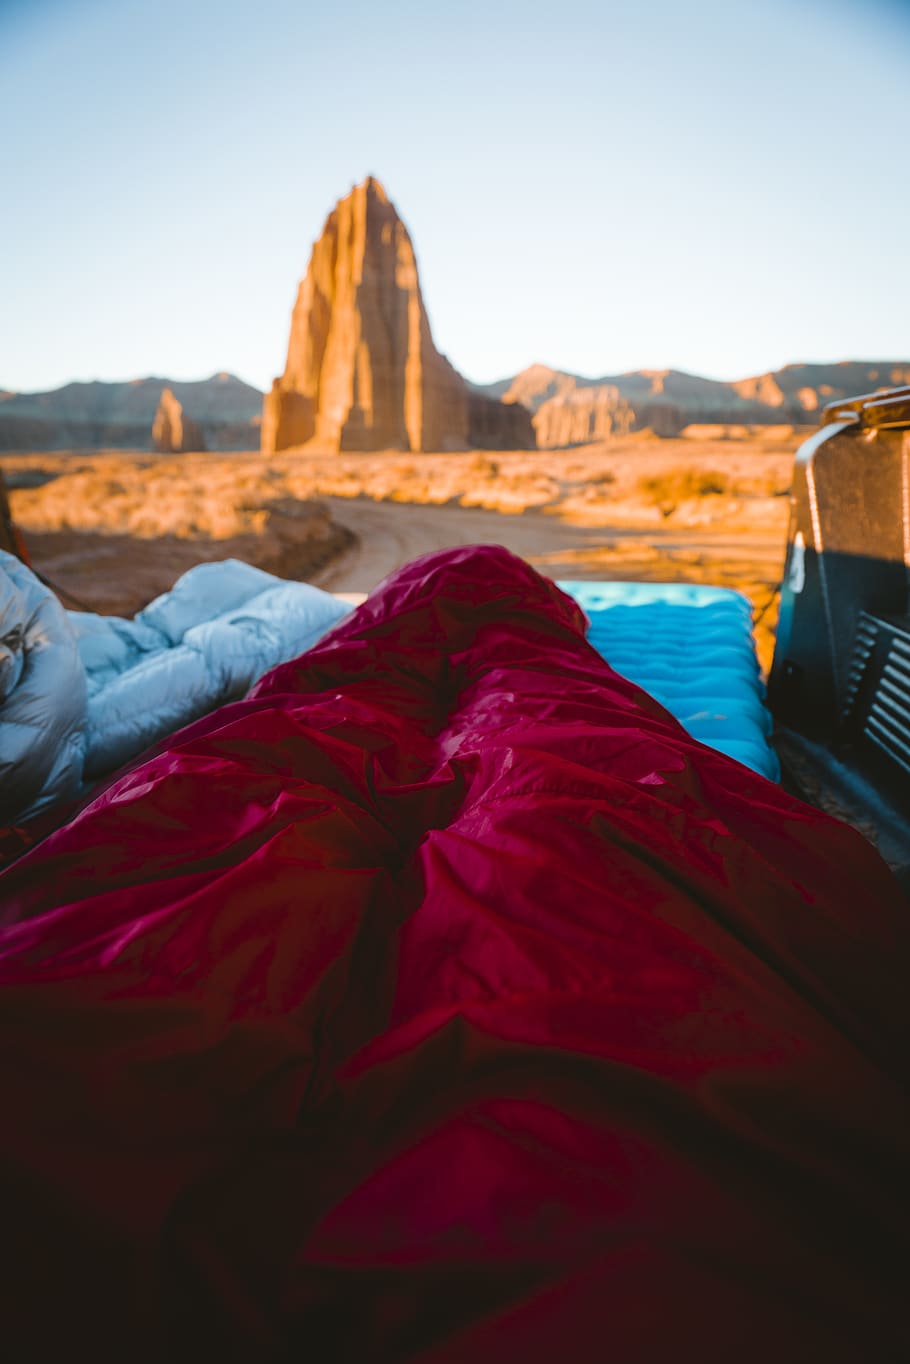 person in sleeping bag overlooking rock formations, nature, capitol reef national park